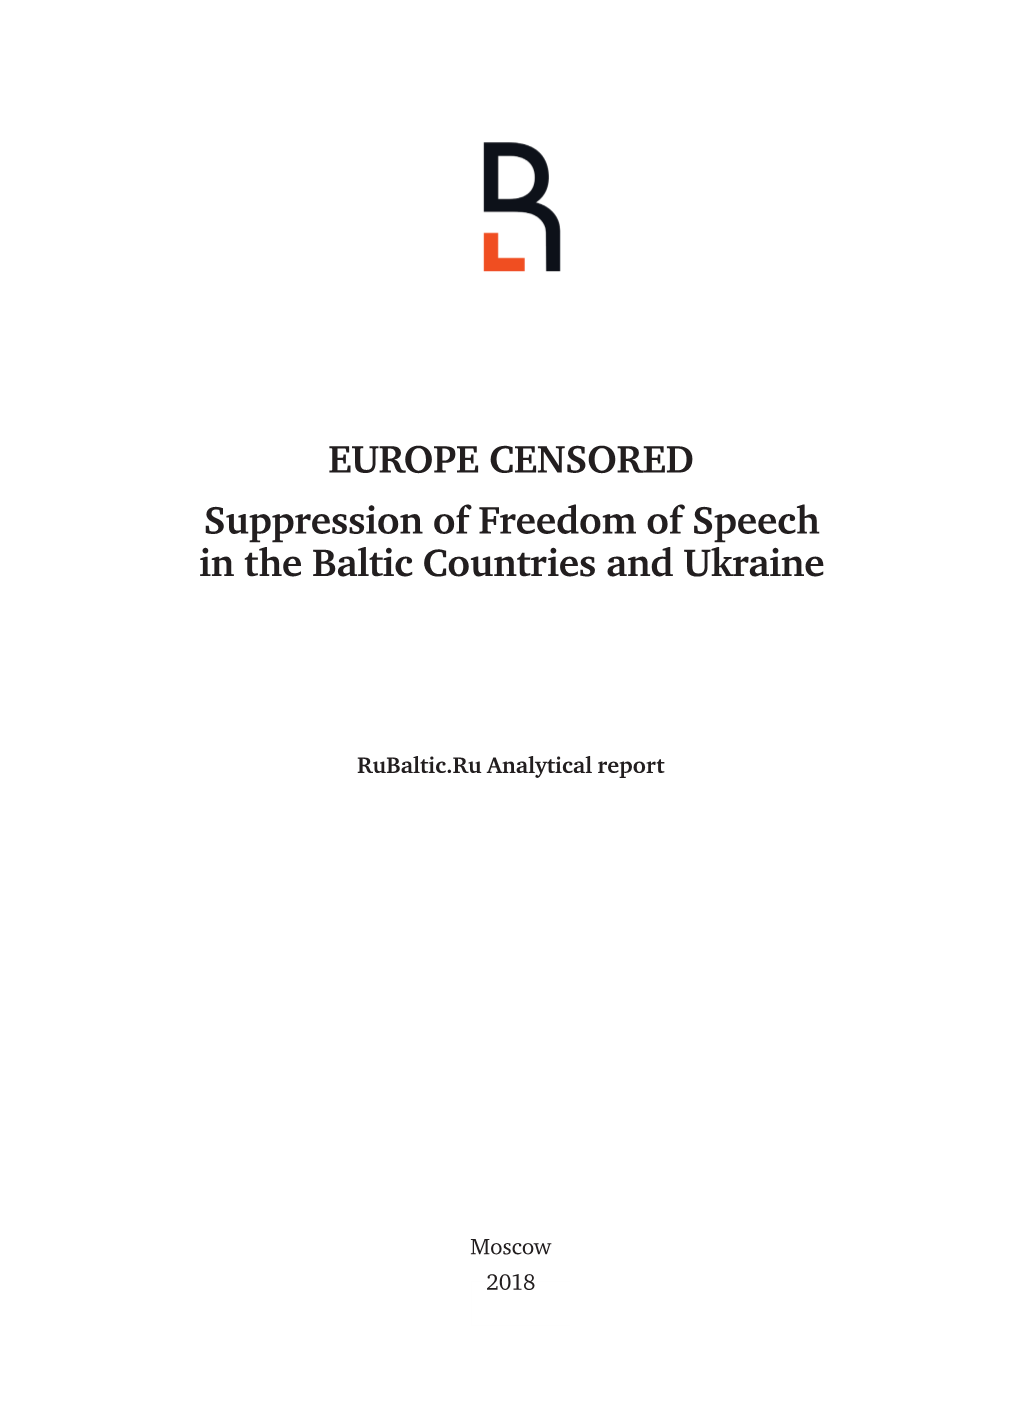 EUROPE CENSORED Suppression of Freedom of Speech in the Baltic Countries and Ukraine